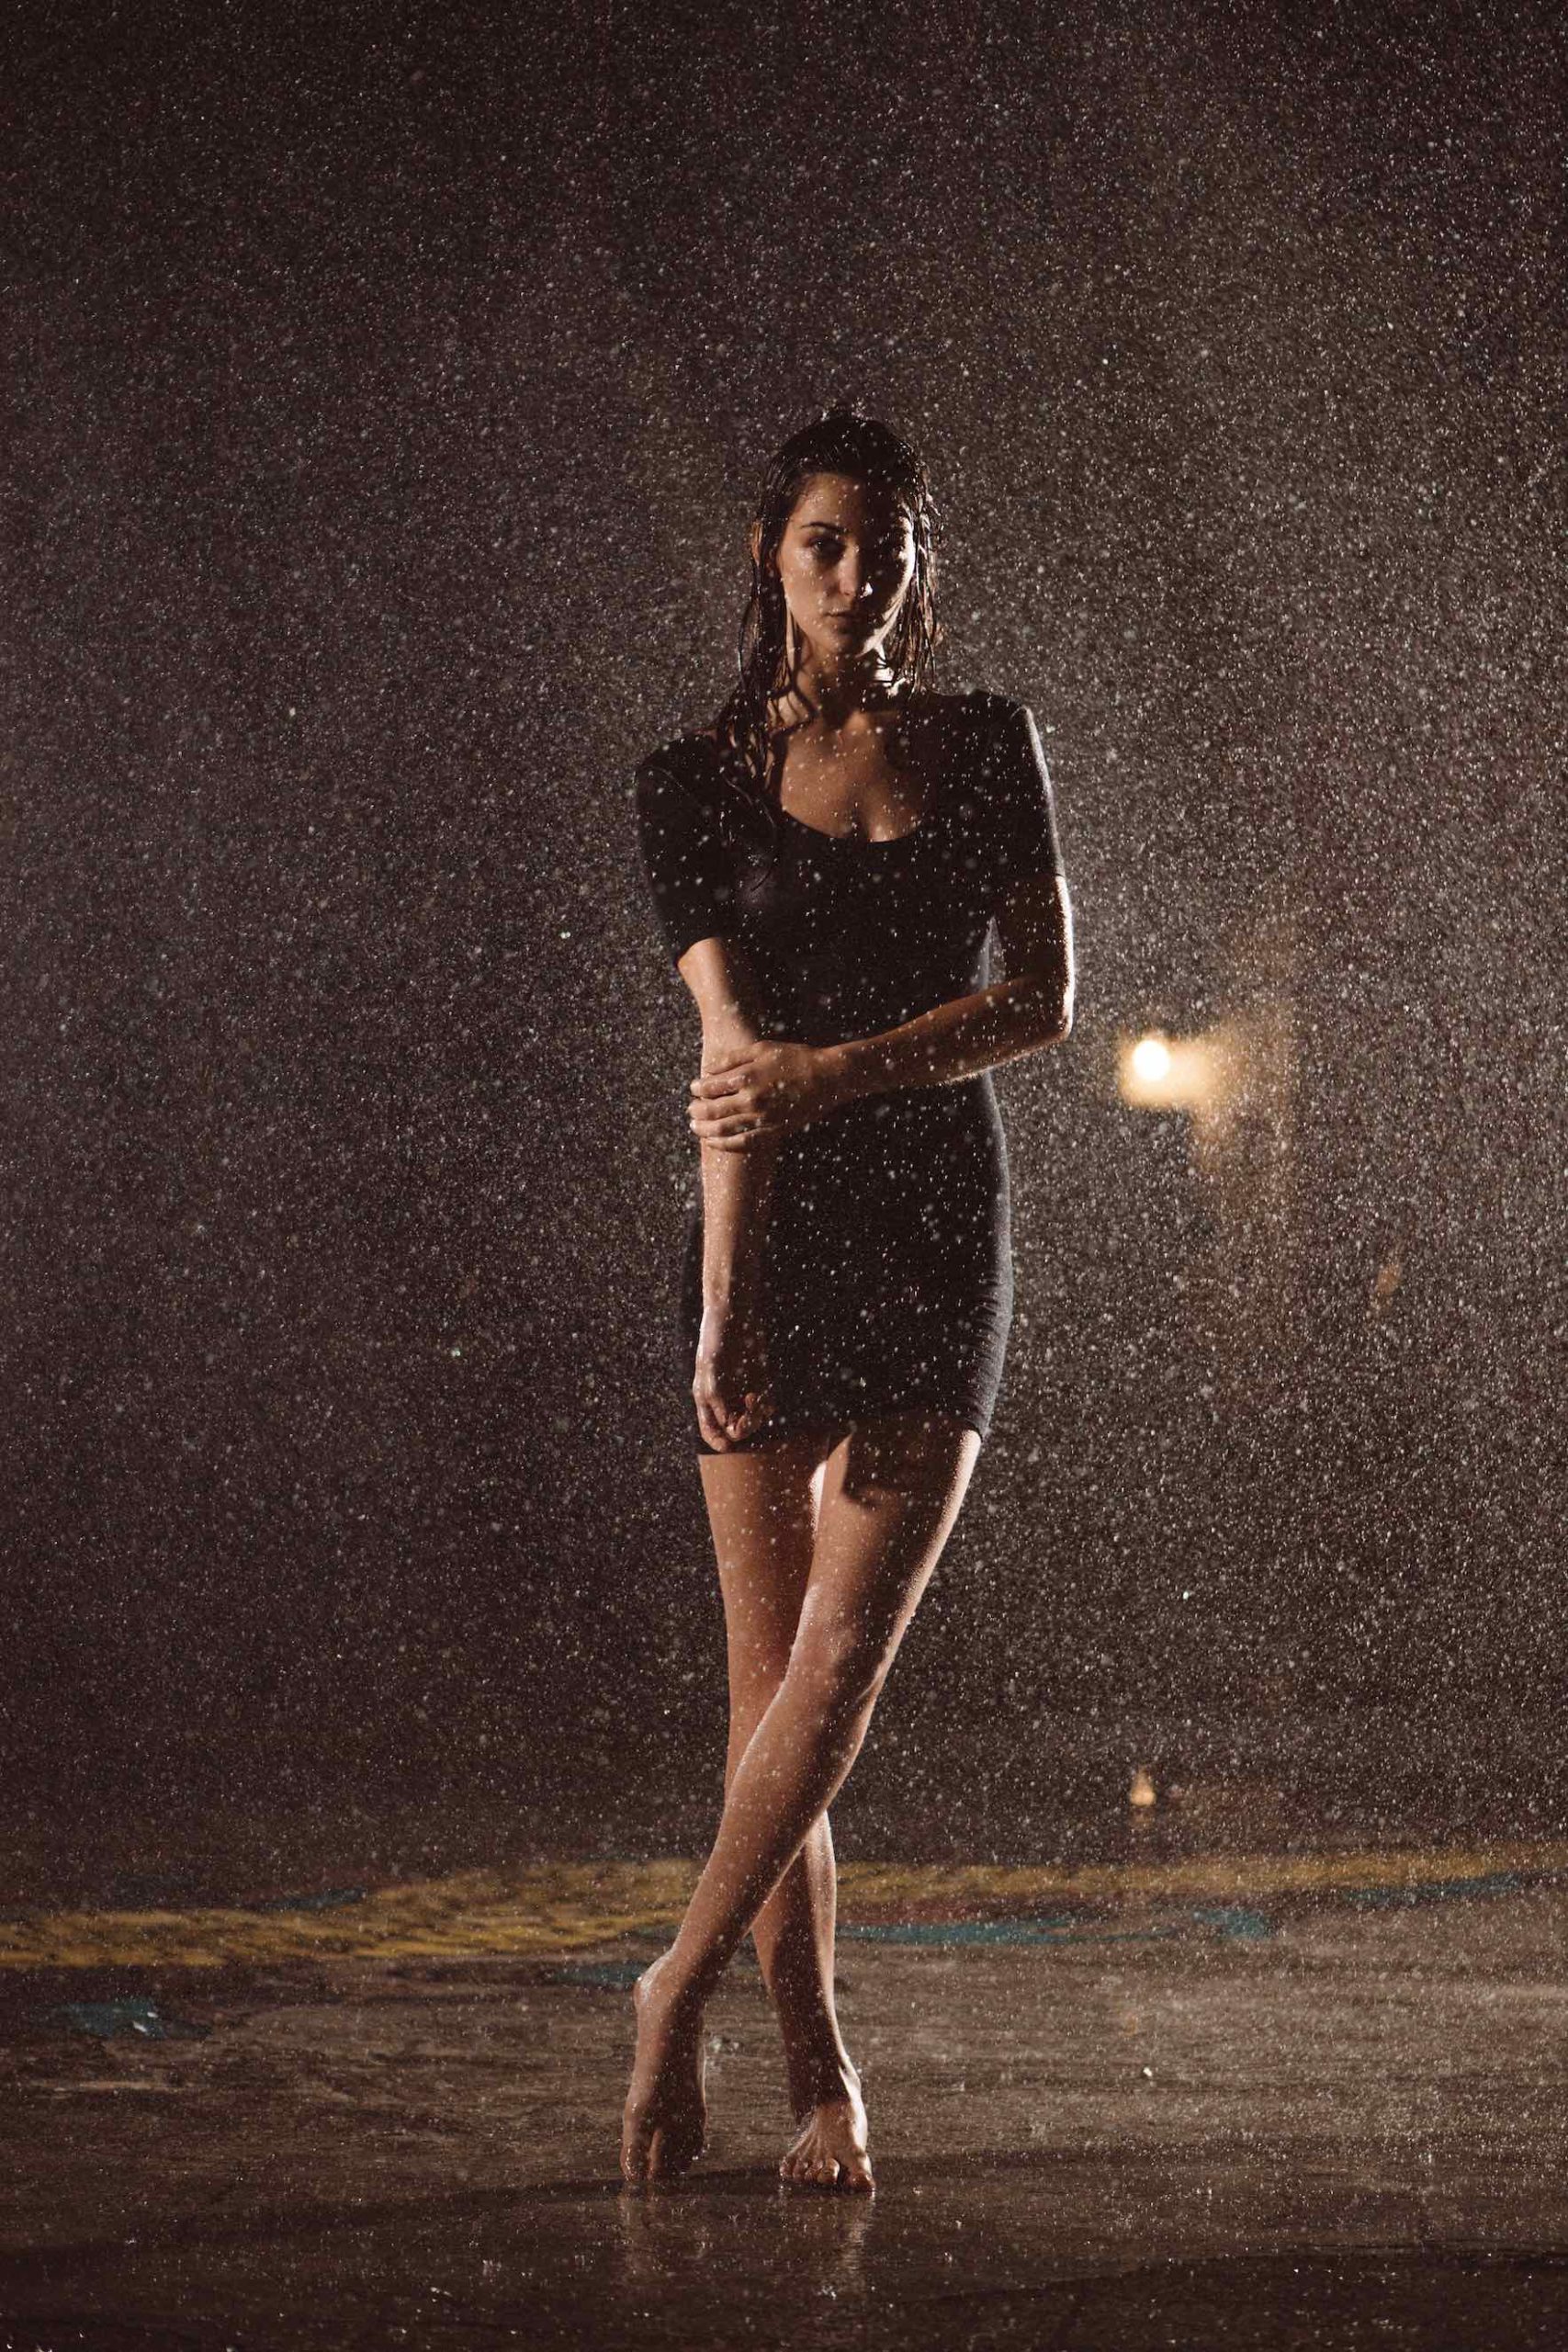 Woman with long hair posing for camera barefoot wearing a black dress under a shower of water